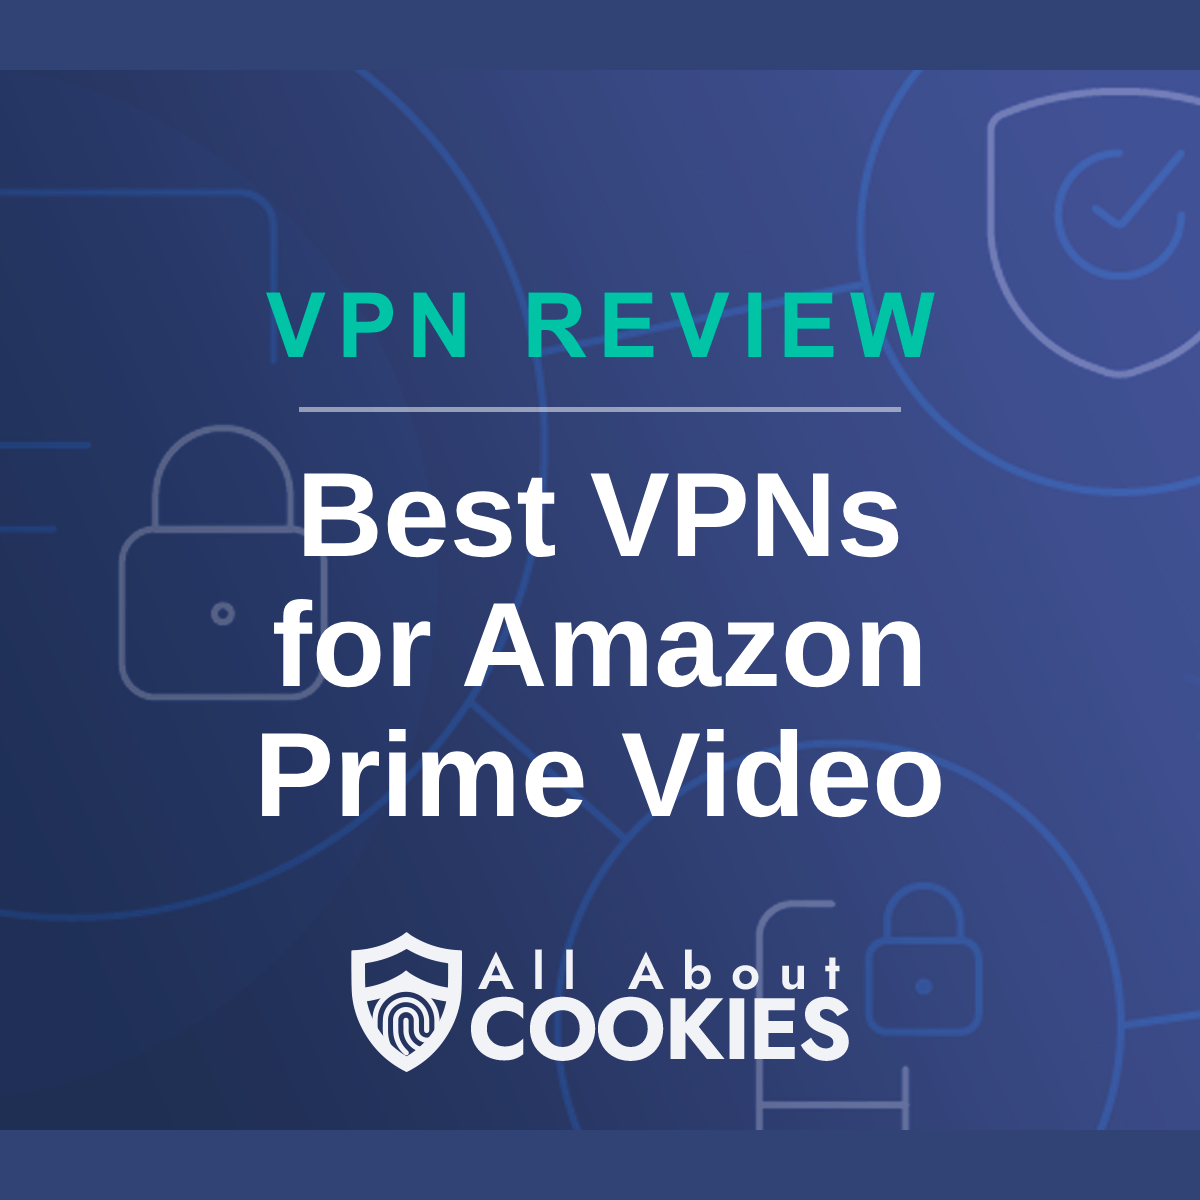 A blue background with images of locks and shields with the text &quot;Best VPNs for Amazon Prime Video&quot; and the All About Cookies logo. 